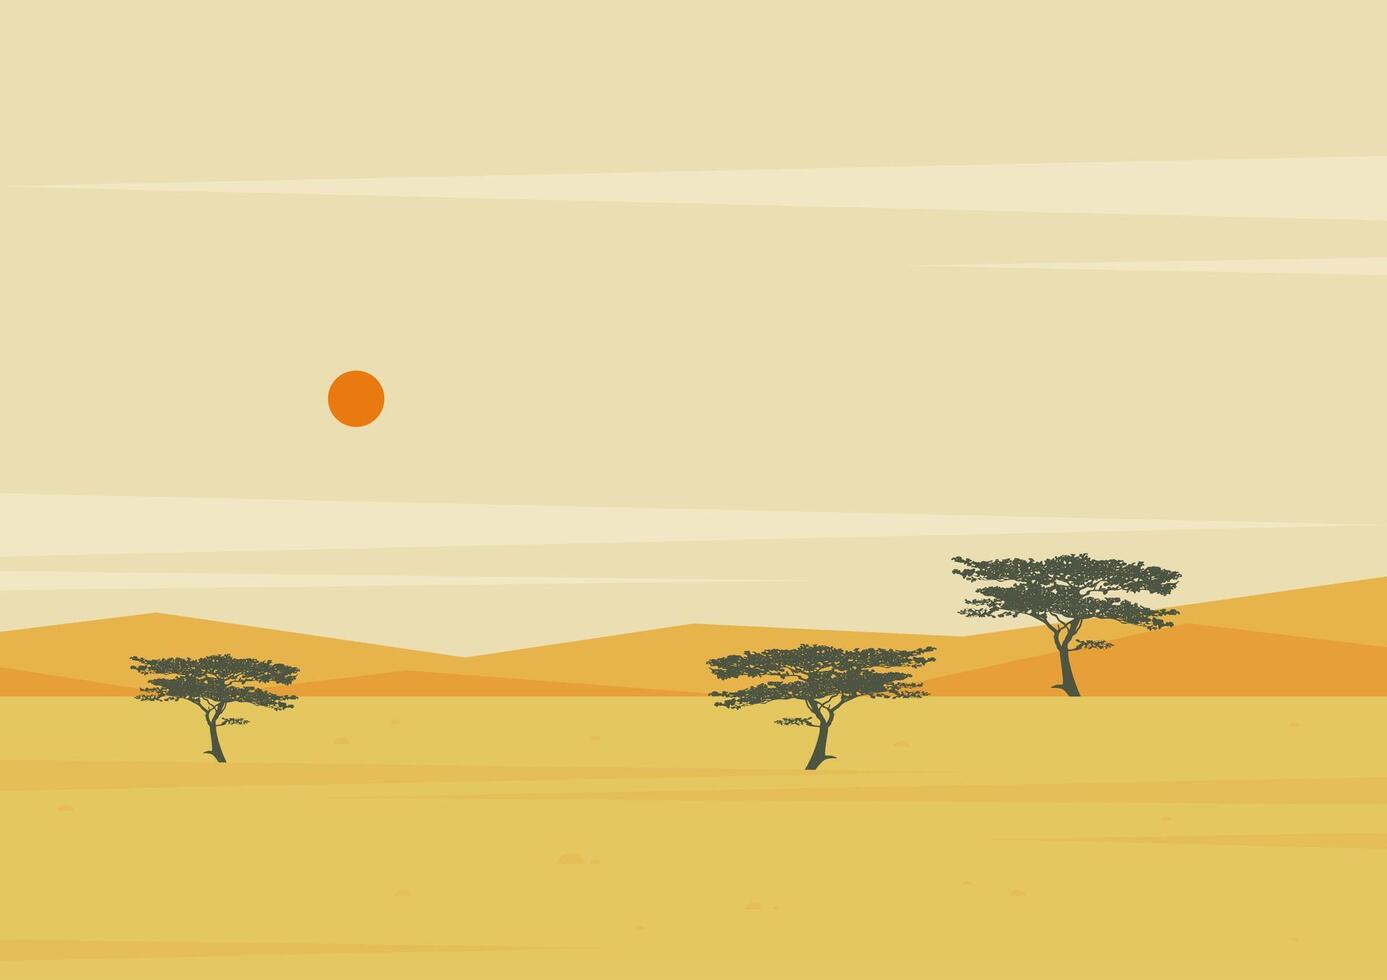 African landscape at sunset, trees and mountains Savannah wild nature, Serengeti national park. vector